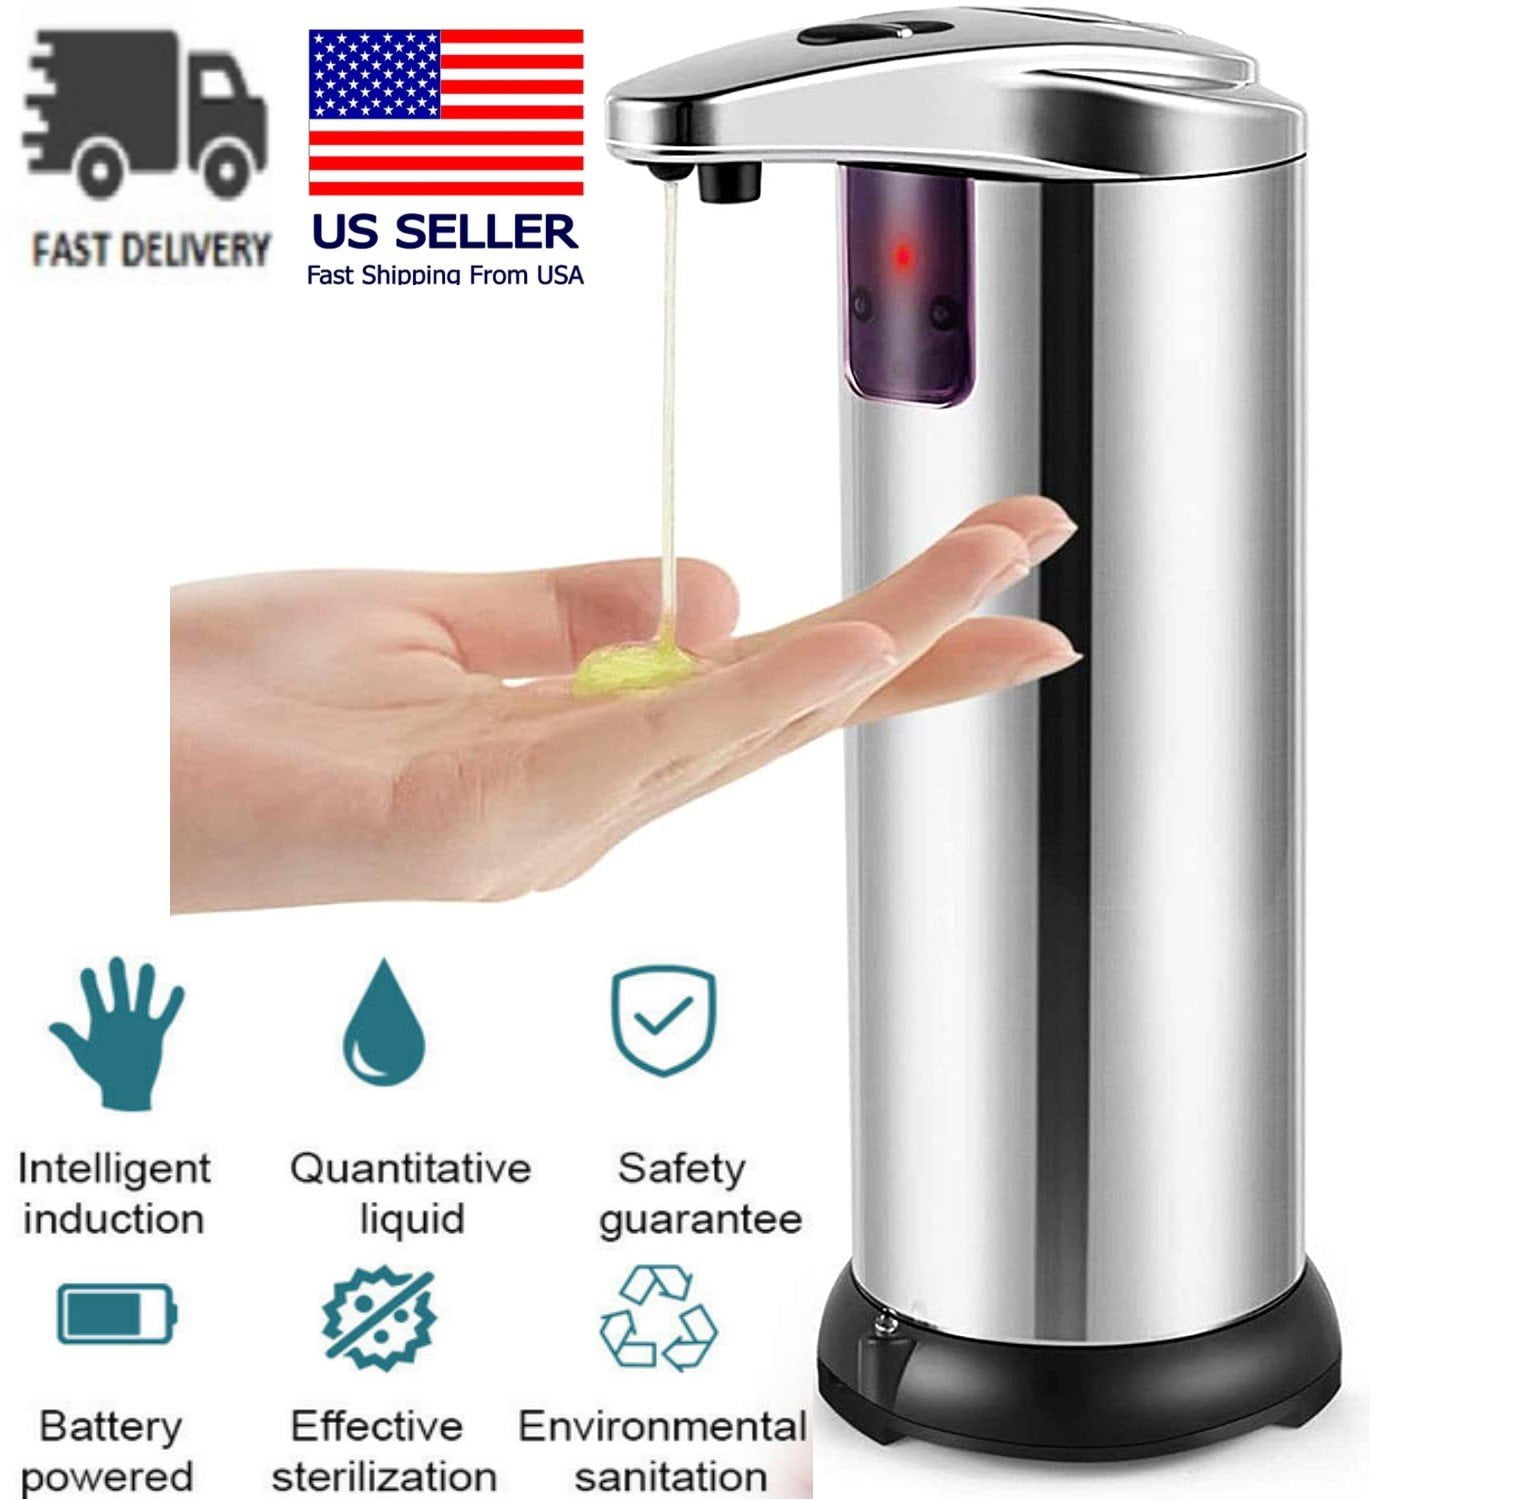 Home or Office *NEW* PREMIUM Automatic Touchless Soap Dispenser Stainless Steel 